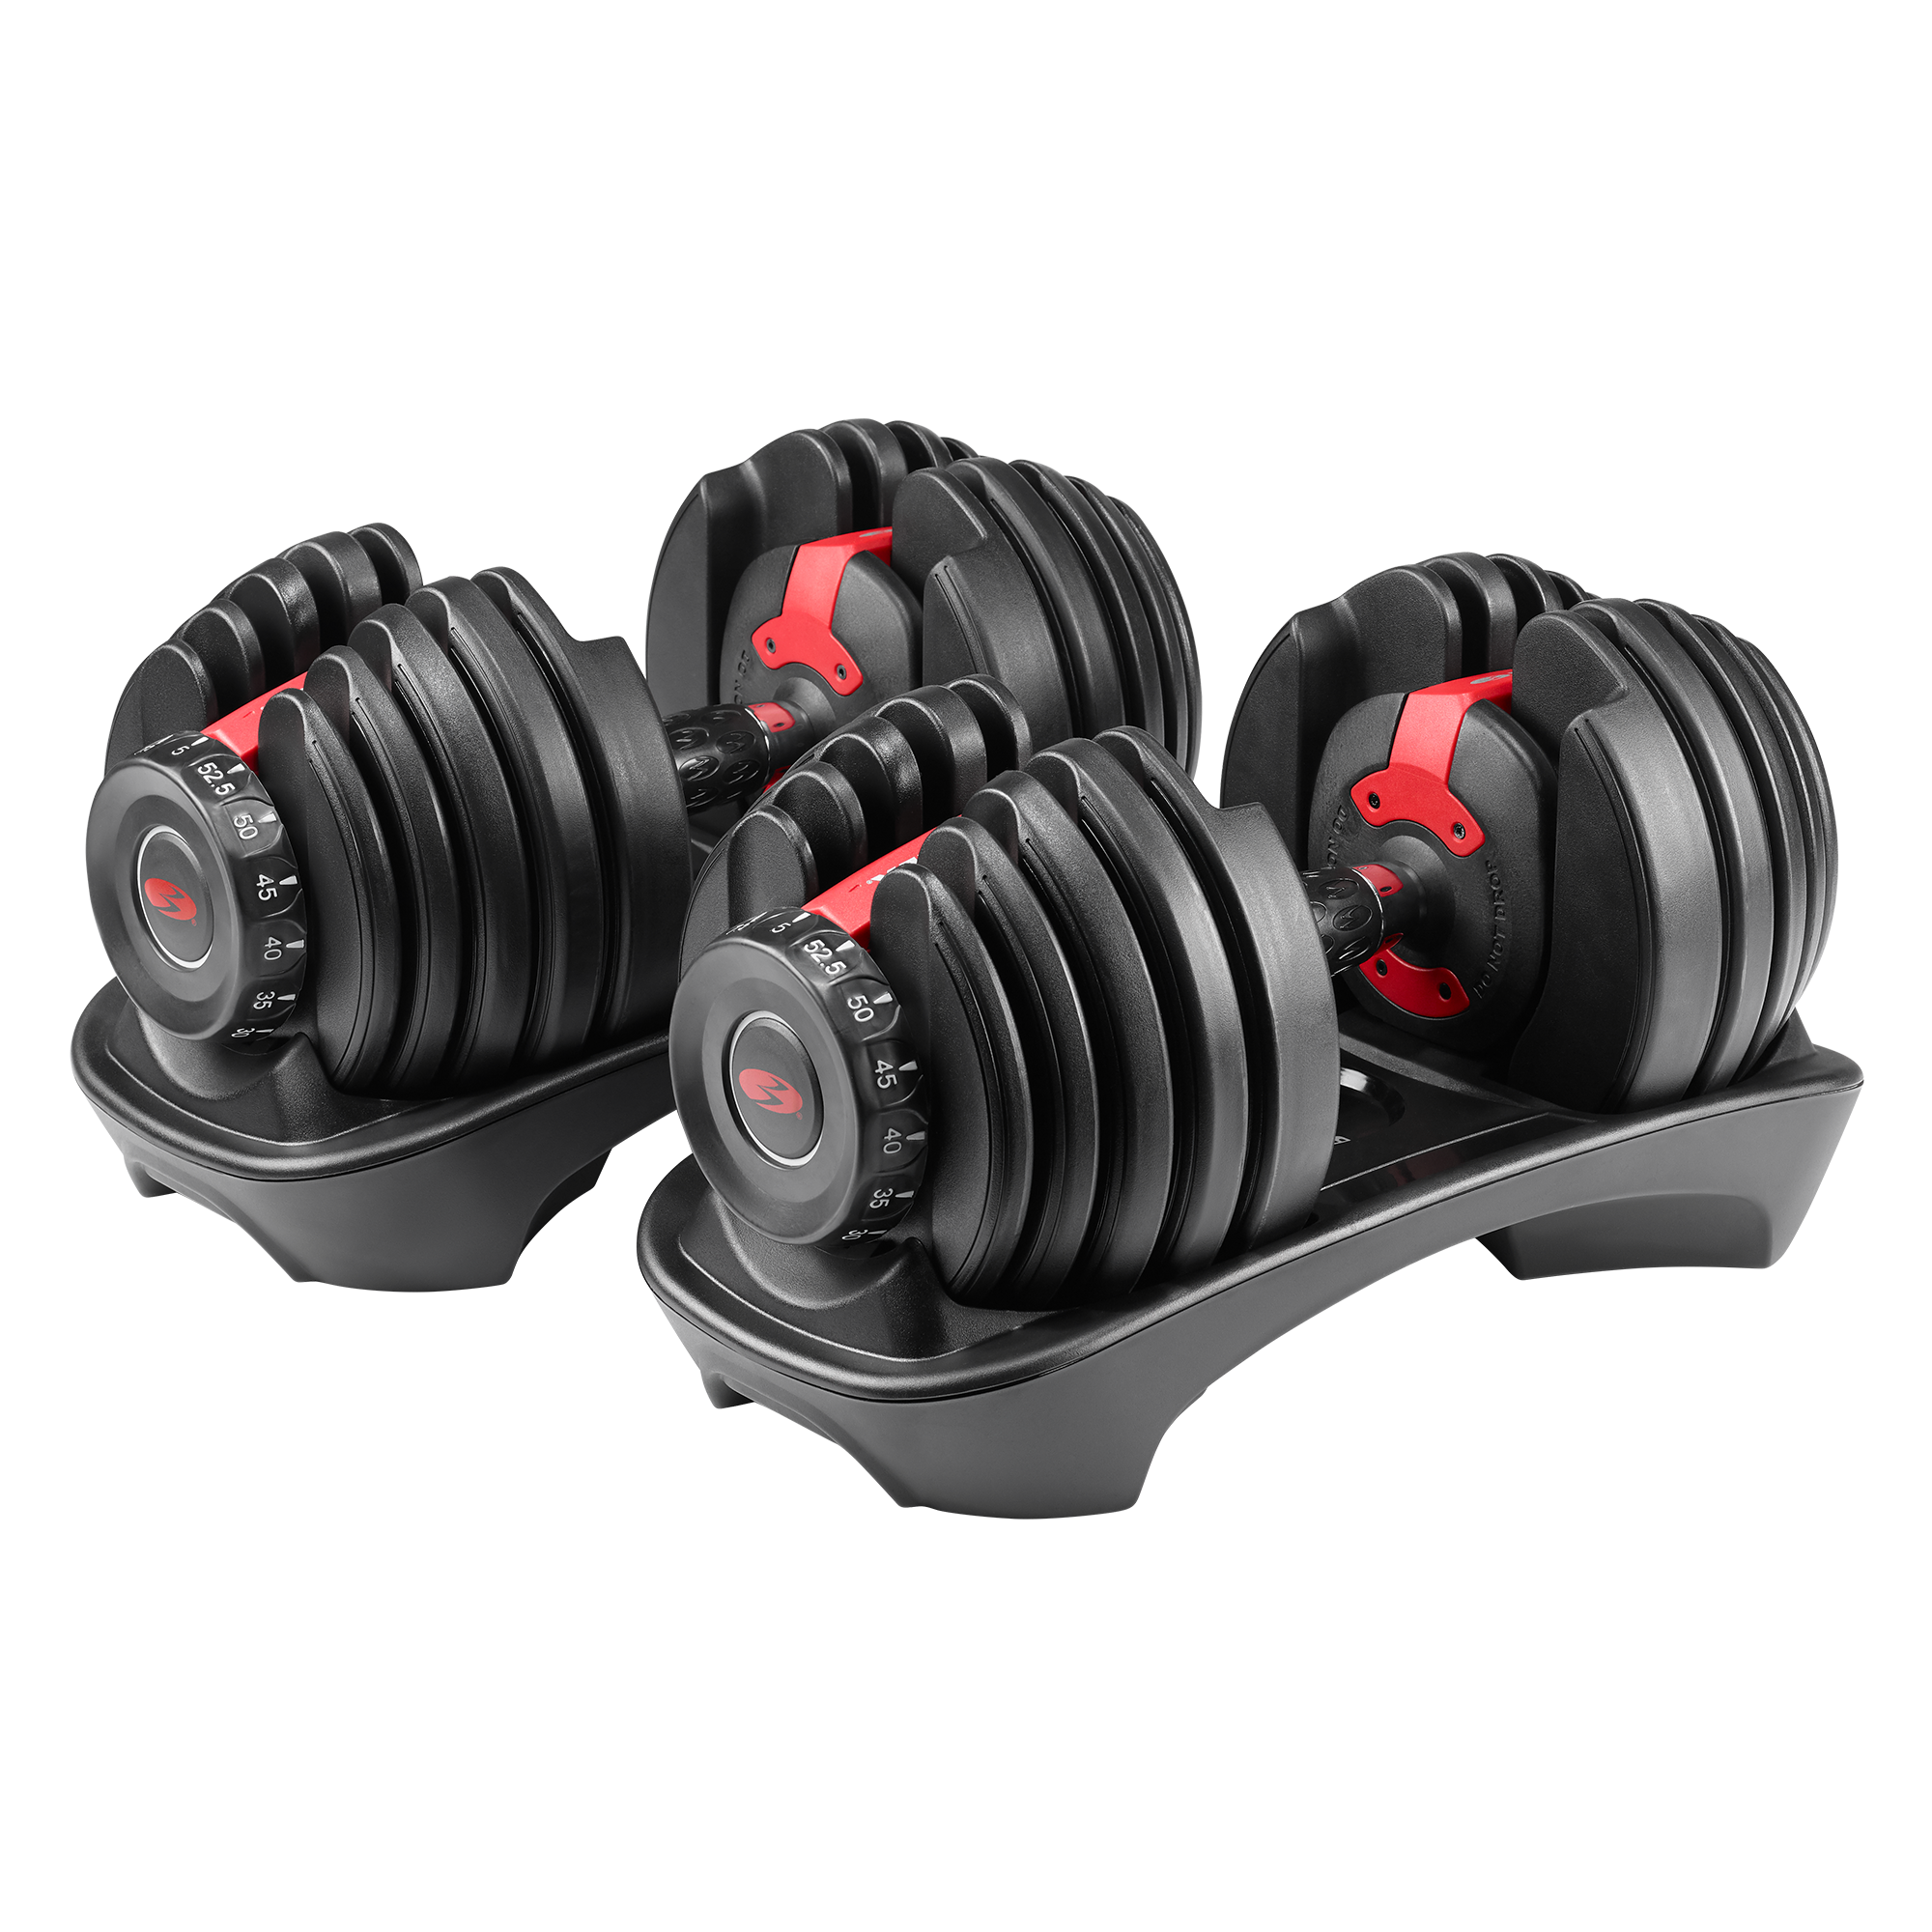 TWO DUMBBELLS Adjustable Dumbbell Weight 52.5lbs Fitness Workout Gym 552 